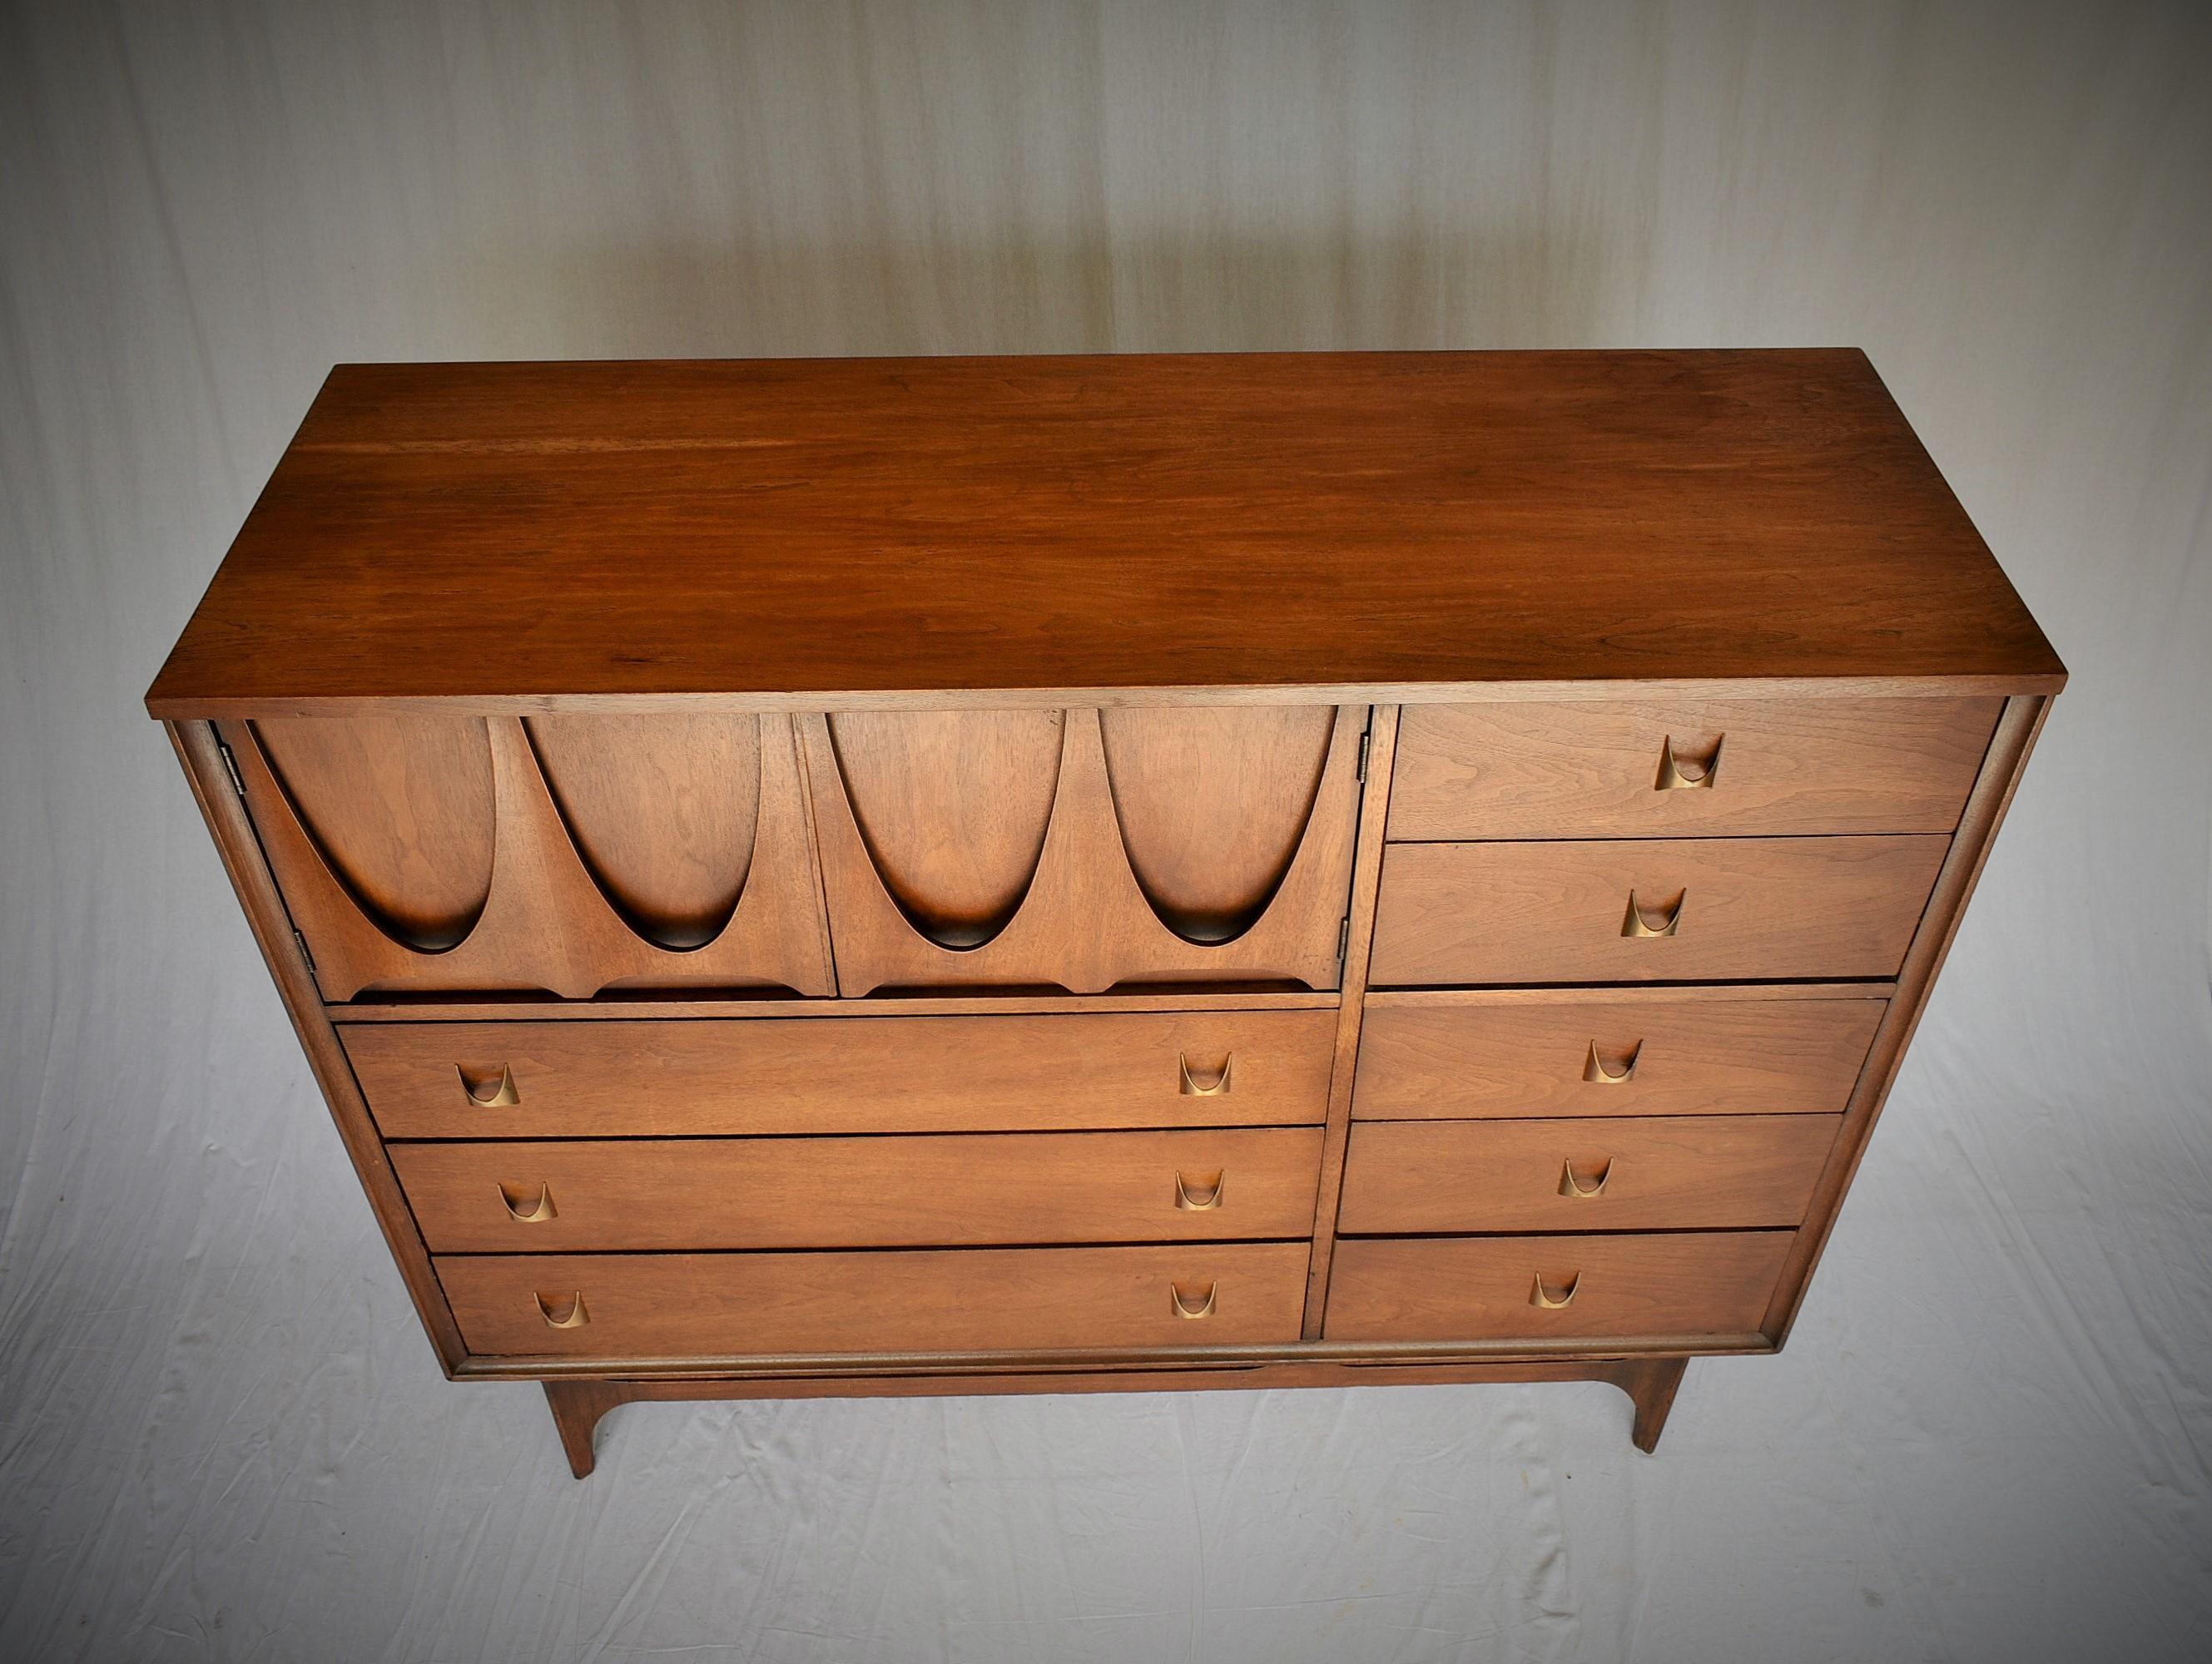 An outstanding mid-century walnut highboy dresser or chest of drawers from the Broyhill Brasilia line, circa 1960s. The chest features eight dovetailed drawers with signature brass handles. Includes open storage with two dividers behind sculpted